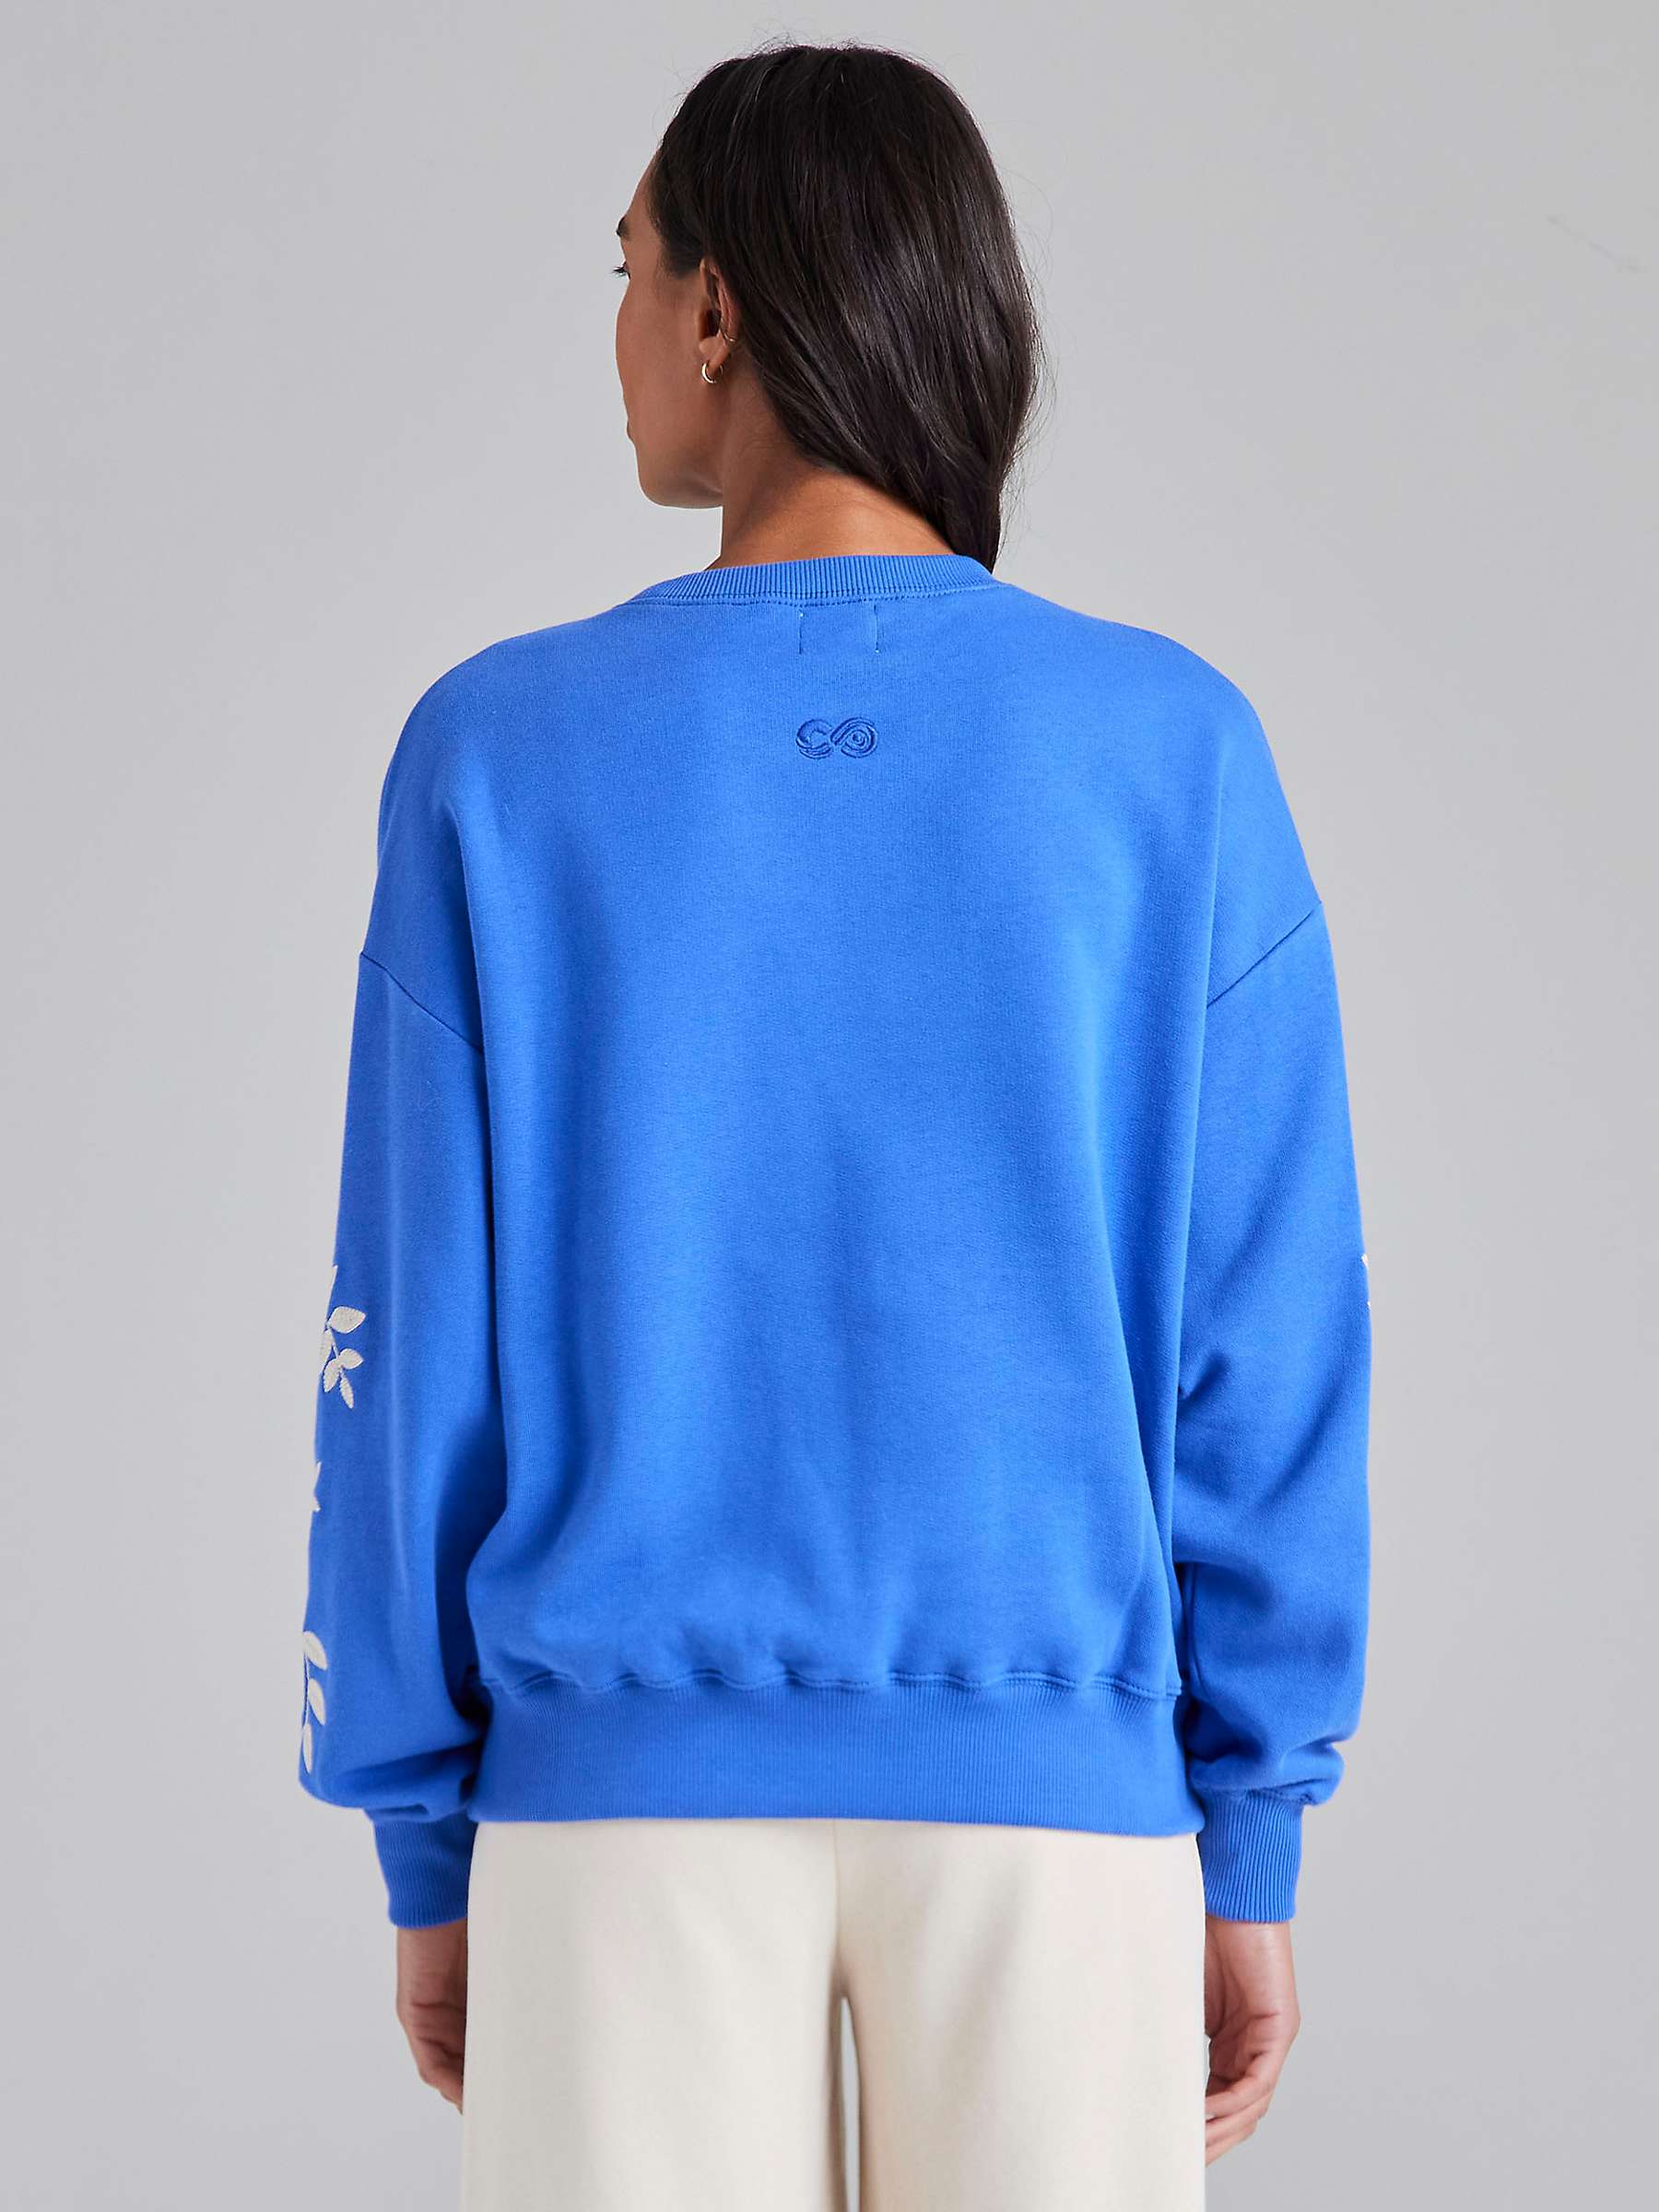 Buy Cape Cove Embroidered Sleeve Cotton Sweatshirt, Dazzling Blue Online at johnlewis.com